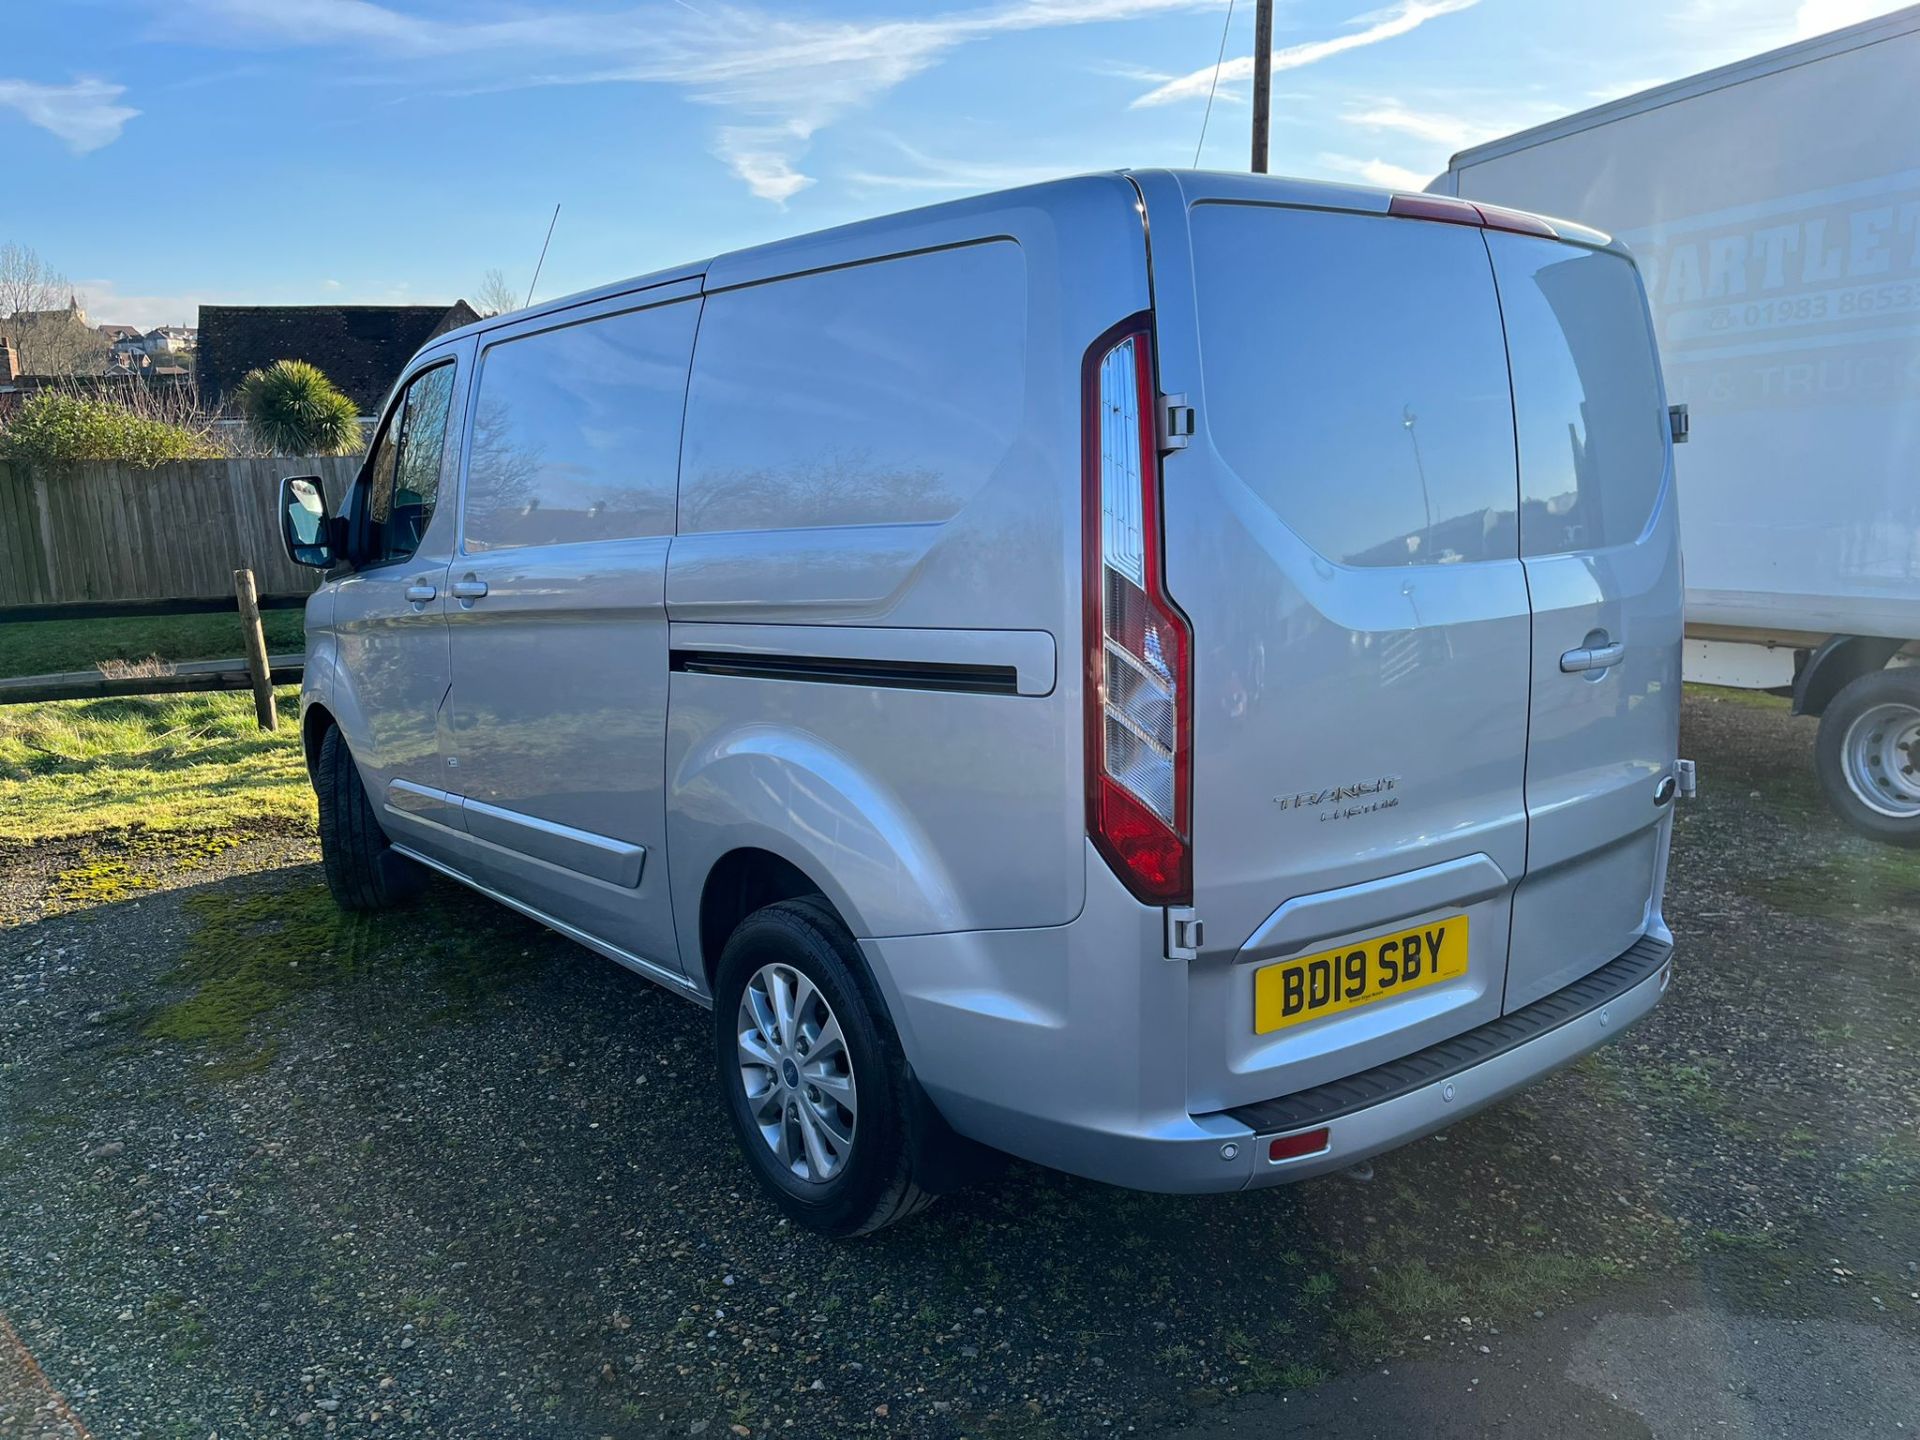 2019 FORD TRANSIT CUSTOM LIMITED MODEL PANEL VAN - L1H1 - EURO 6 AD BLUE - FSH - BD19 SBY - Image 2 of 14